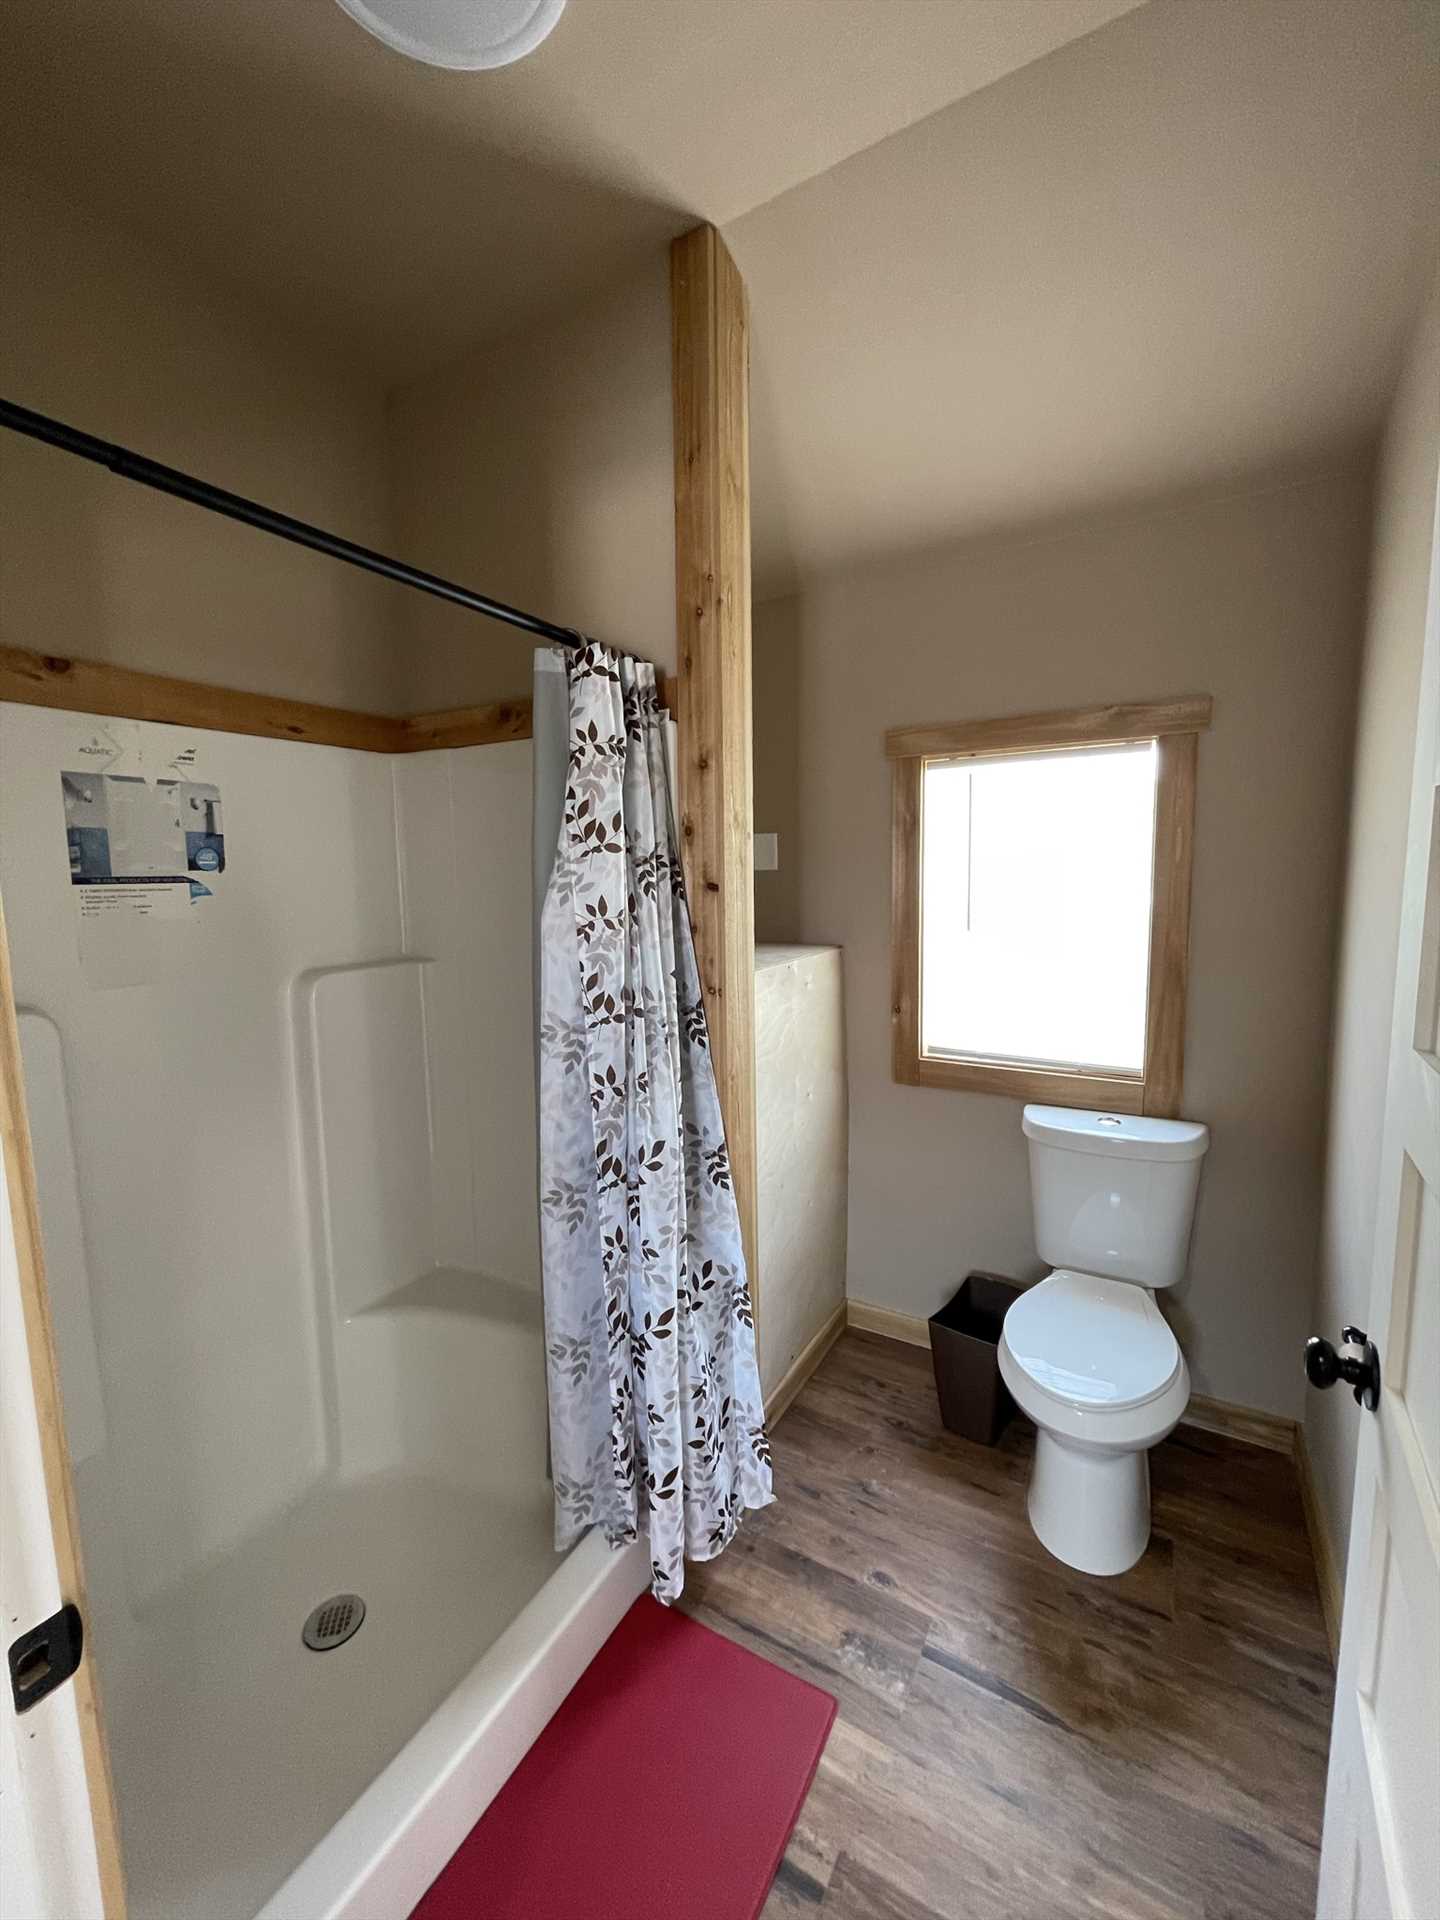                                                 Your spotless bathroom includes a big shower stall, and clean bath linens are provided, too!